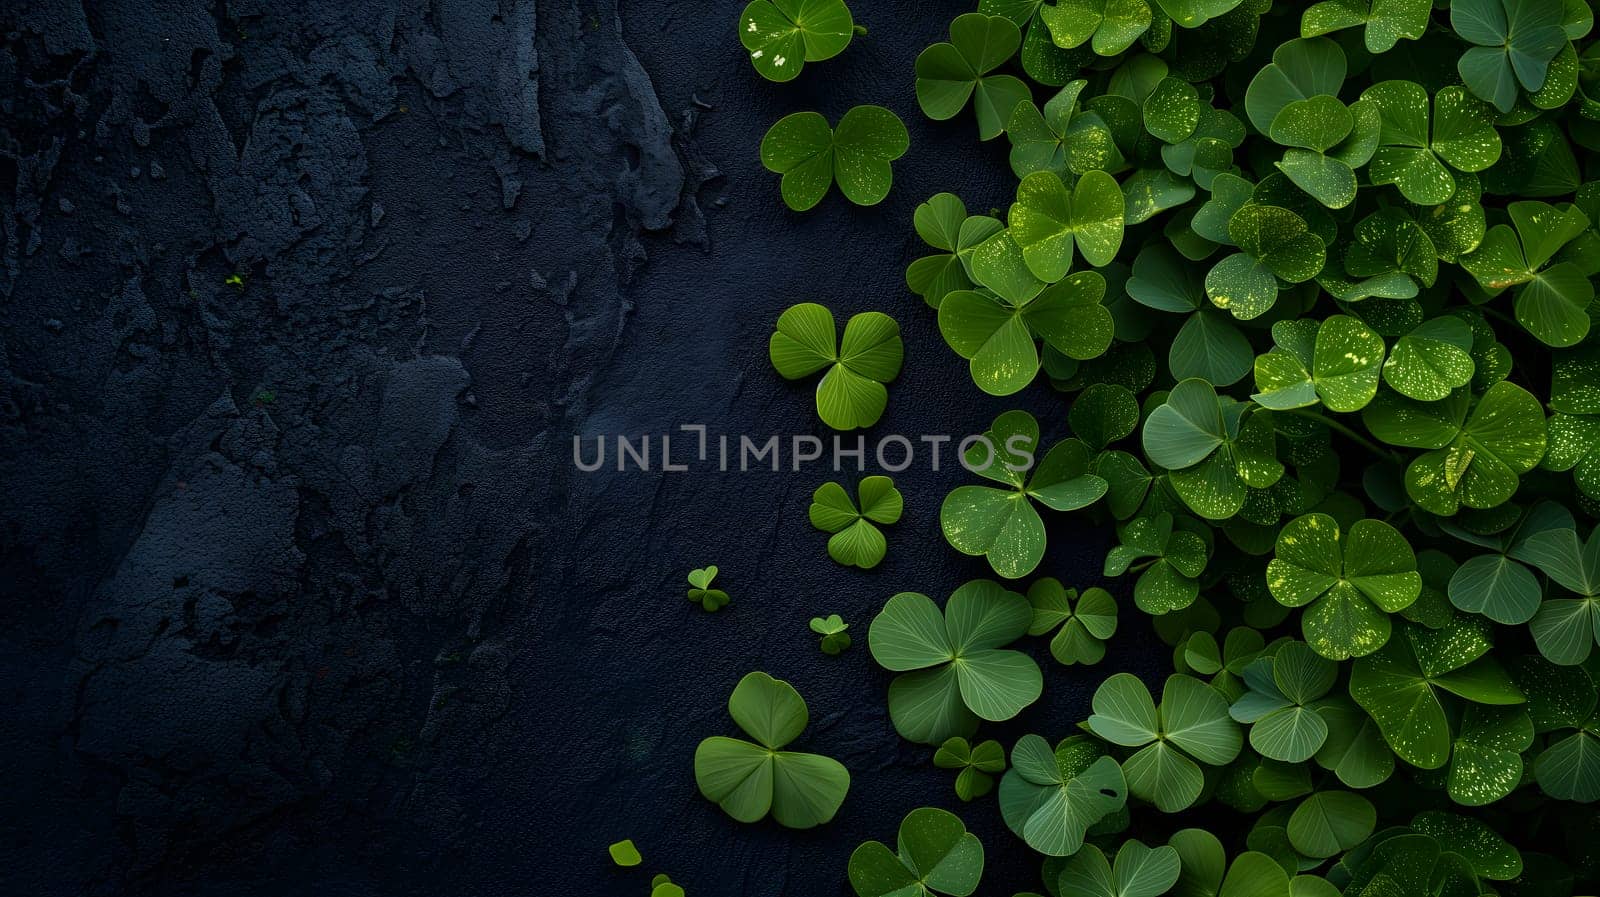 clover with black background for St. Patricks day by z1b